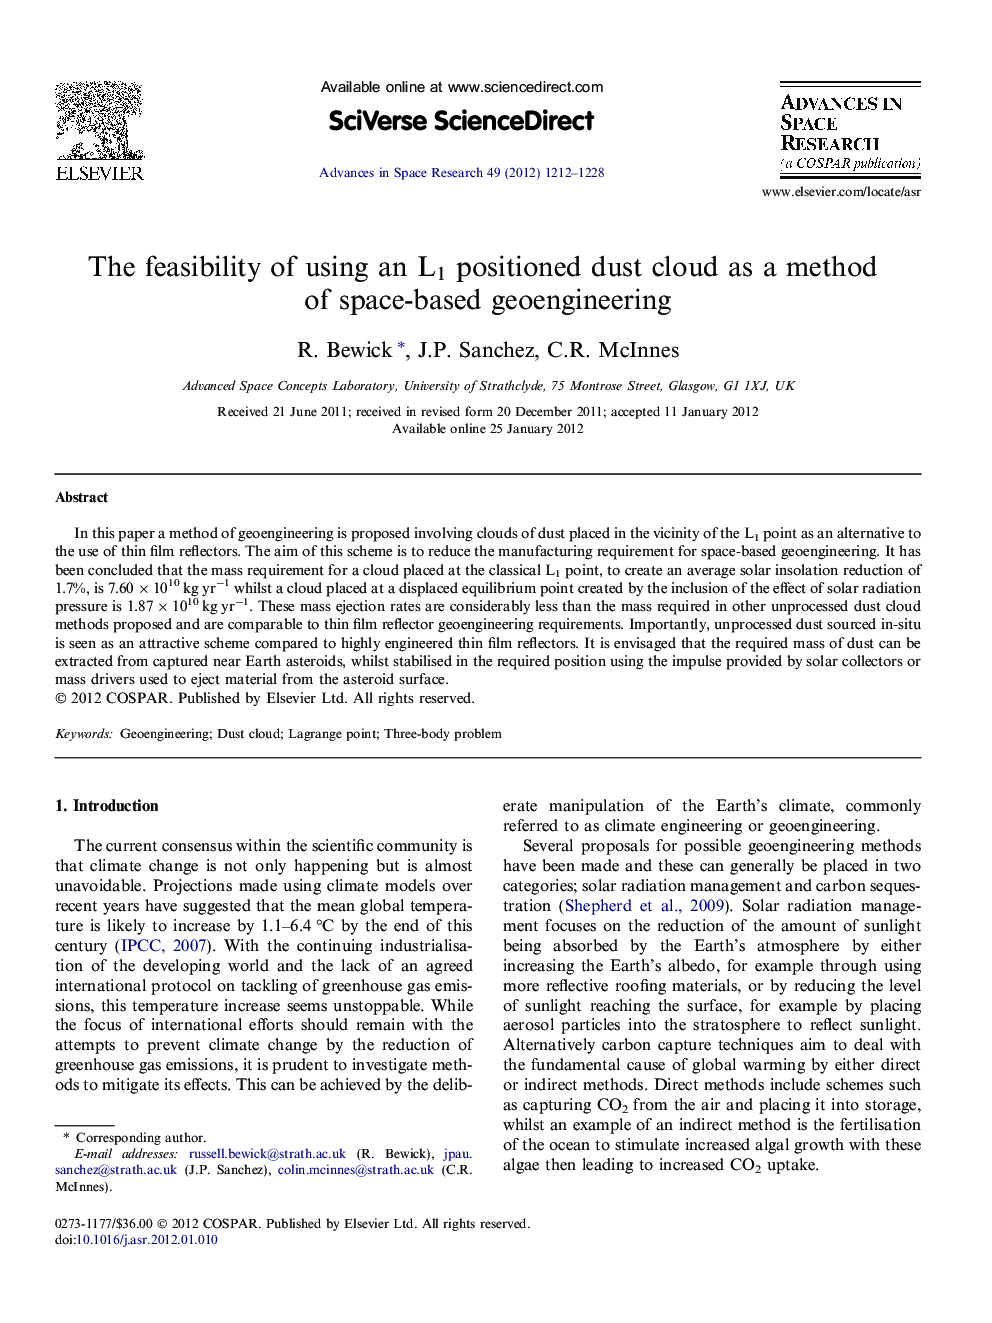 The feasibility of using an L1 positioned dust cloud as a method of space-based geoengineering